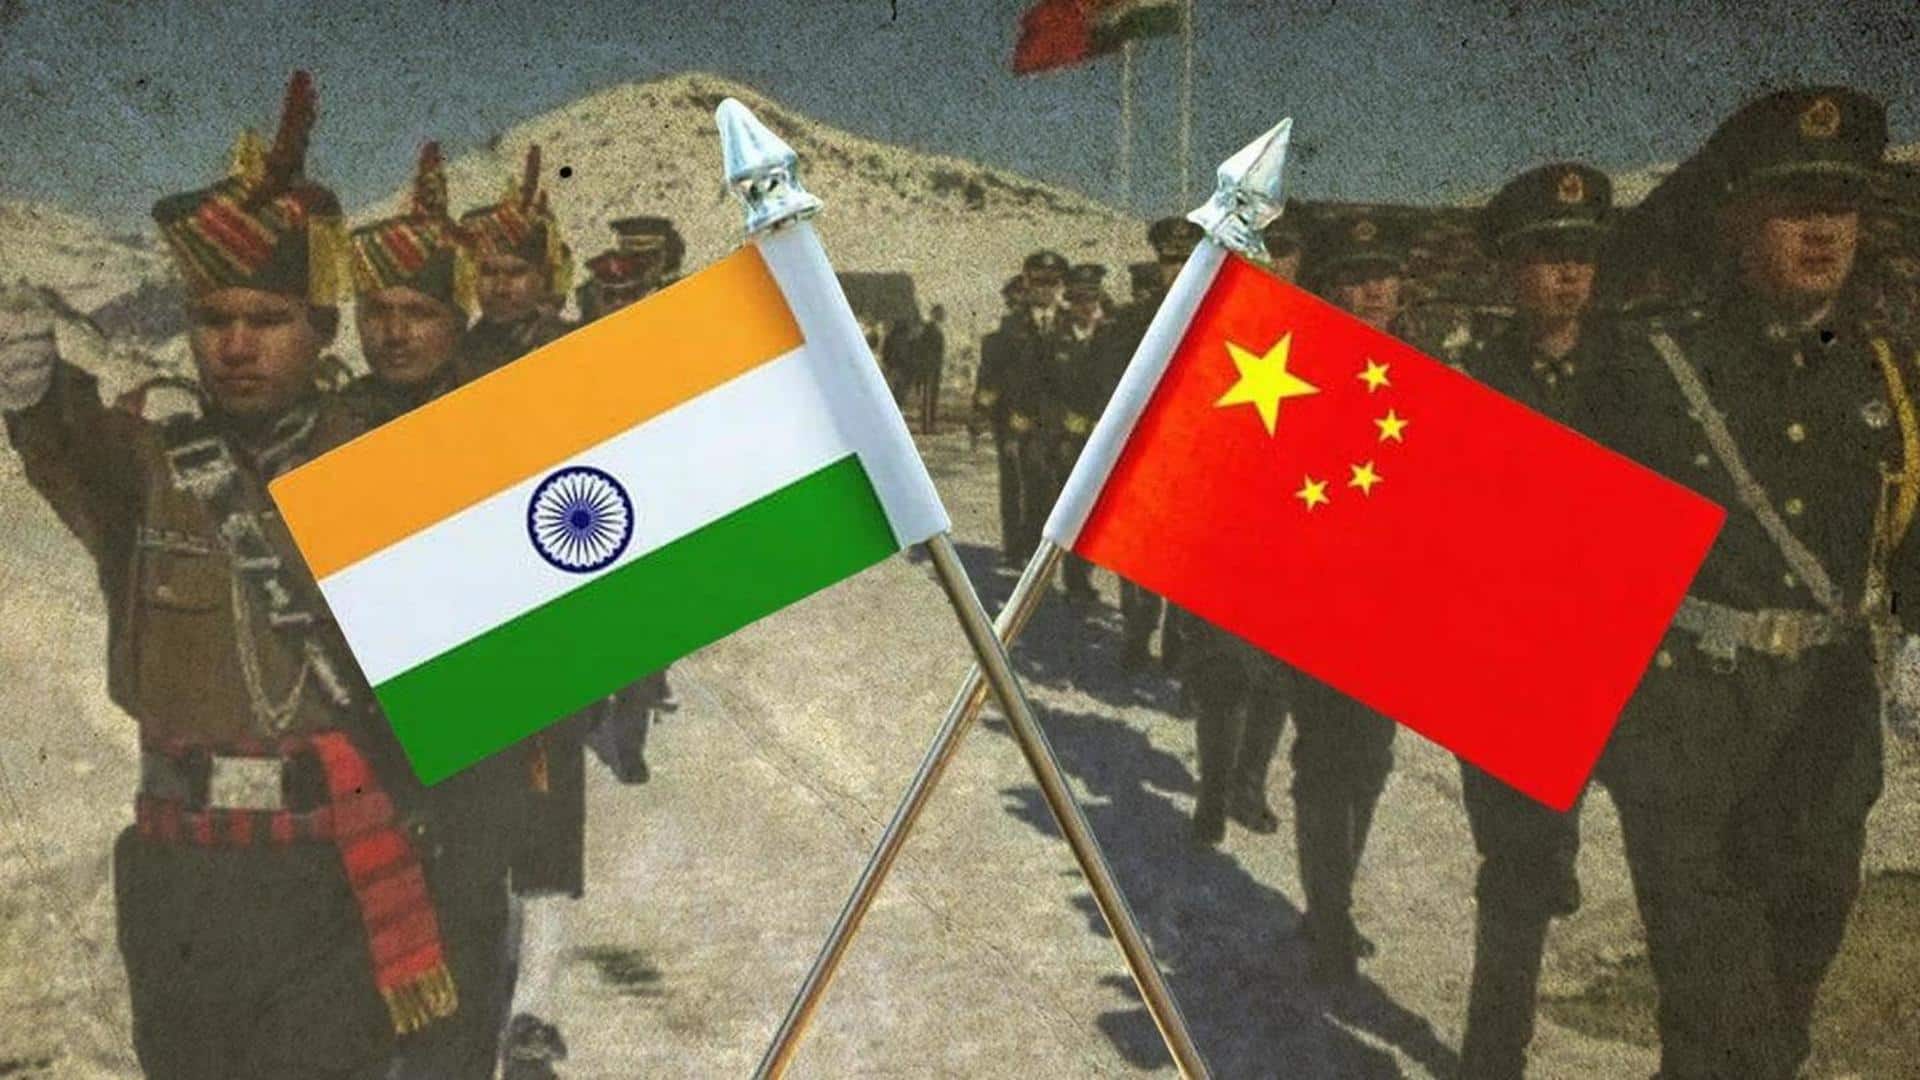 Indian, Chinese soldiers clashed in Arunachal Pradesh last week: Reports